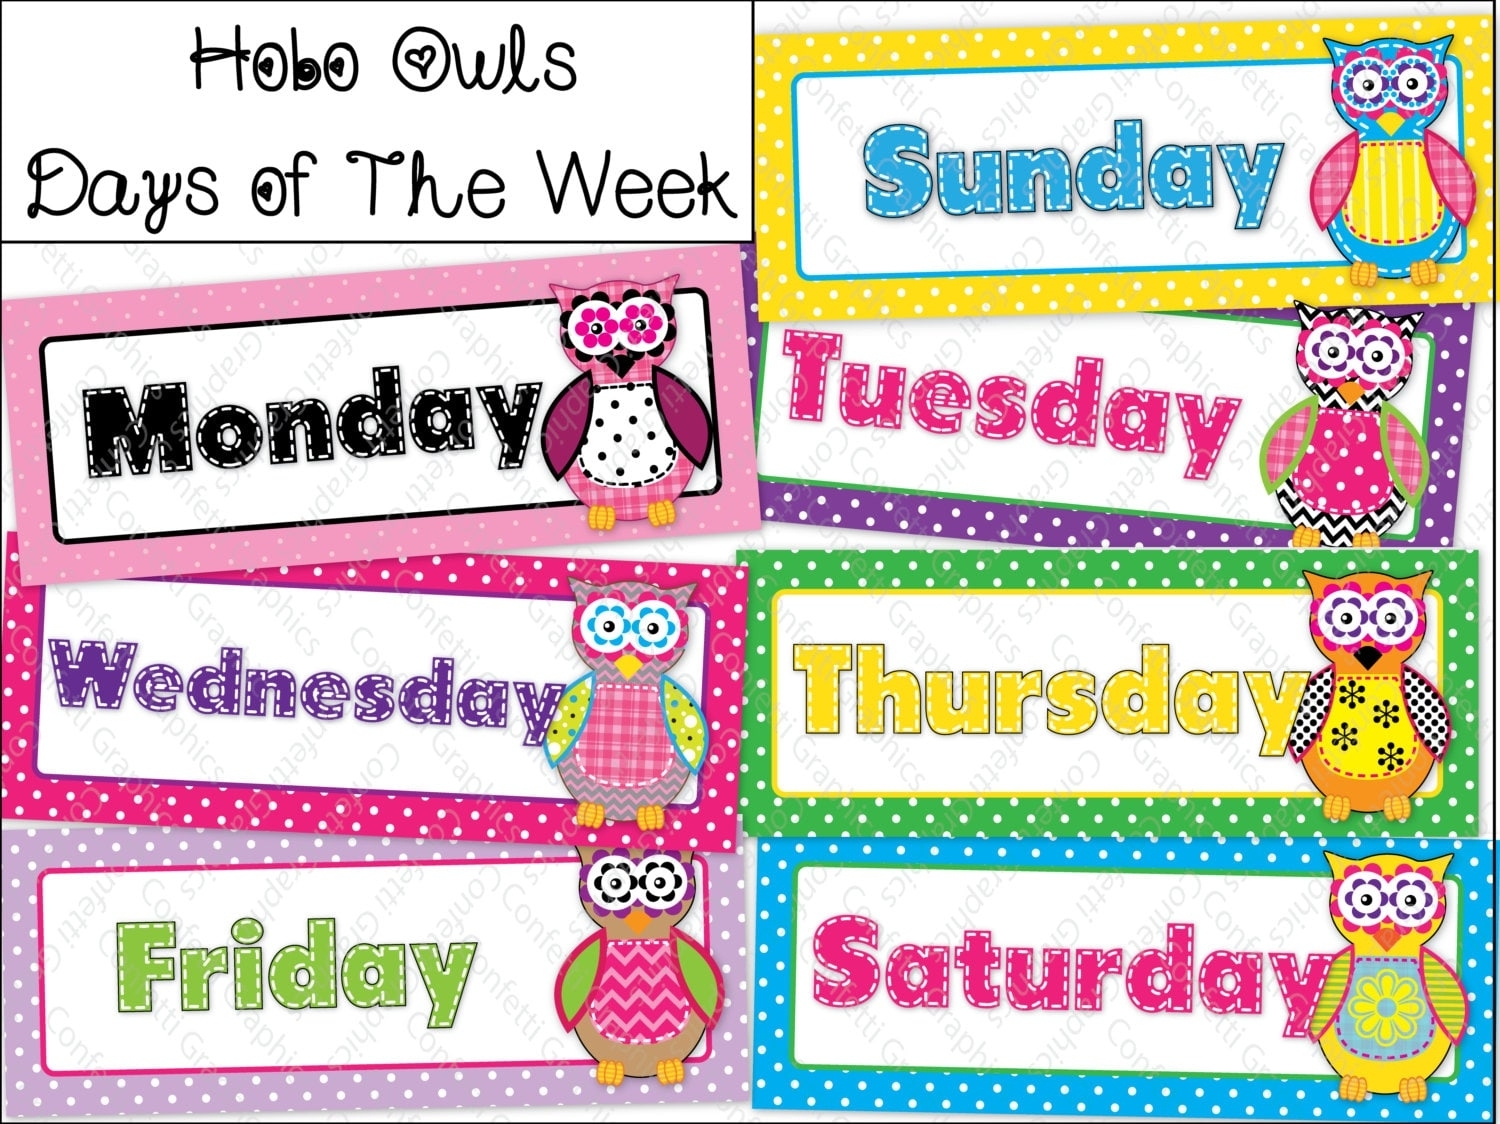 Days Of The Week Calendar Cards Owl Polka Dot Hobo Stitched